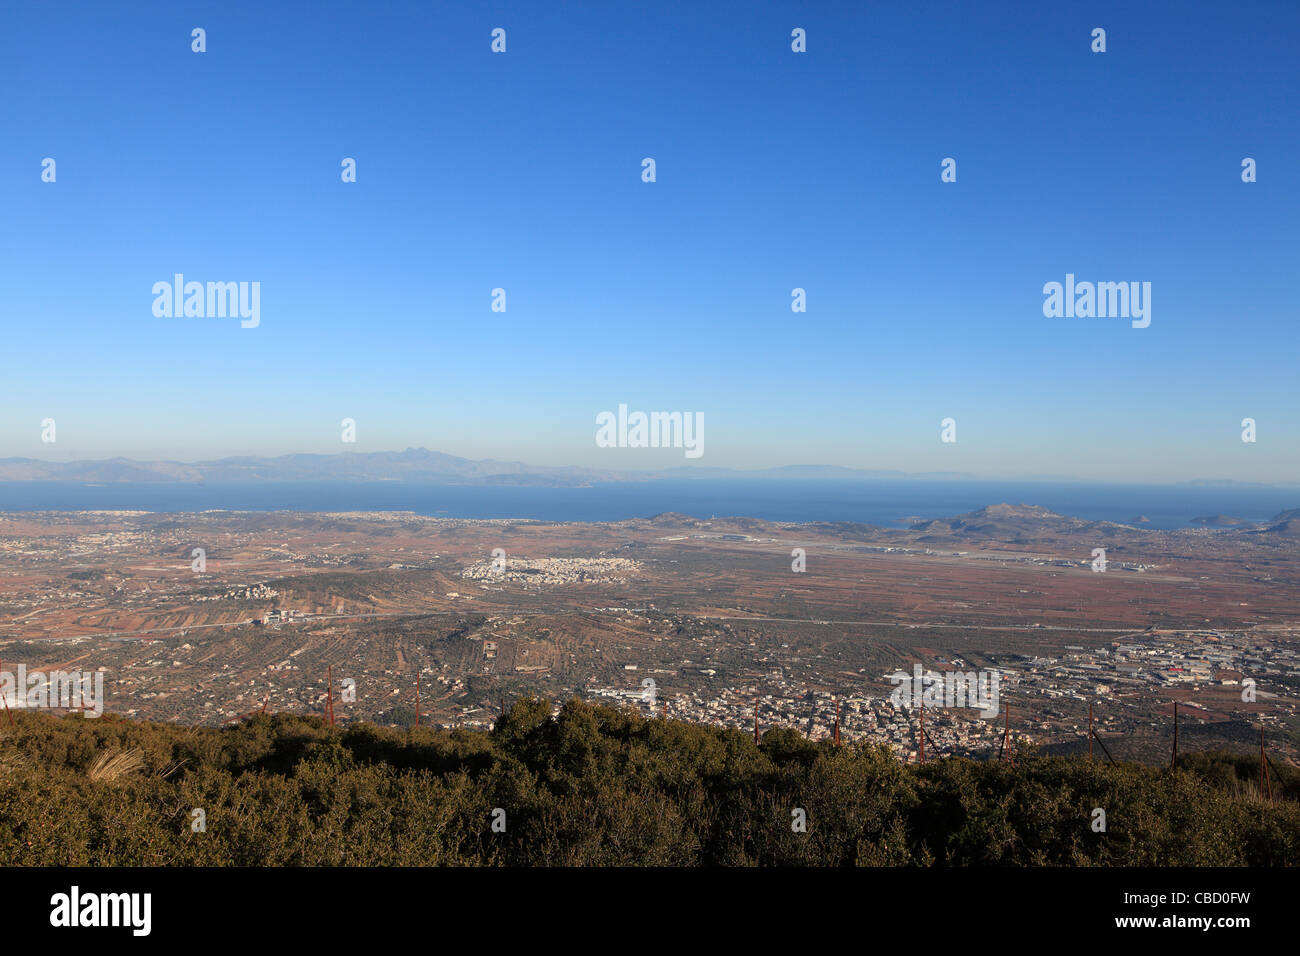 greece athens attica the view towards the airport from mount hymettus Stock Photo